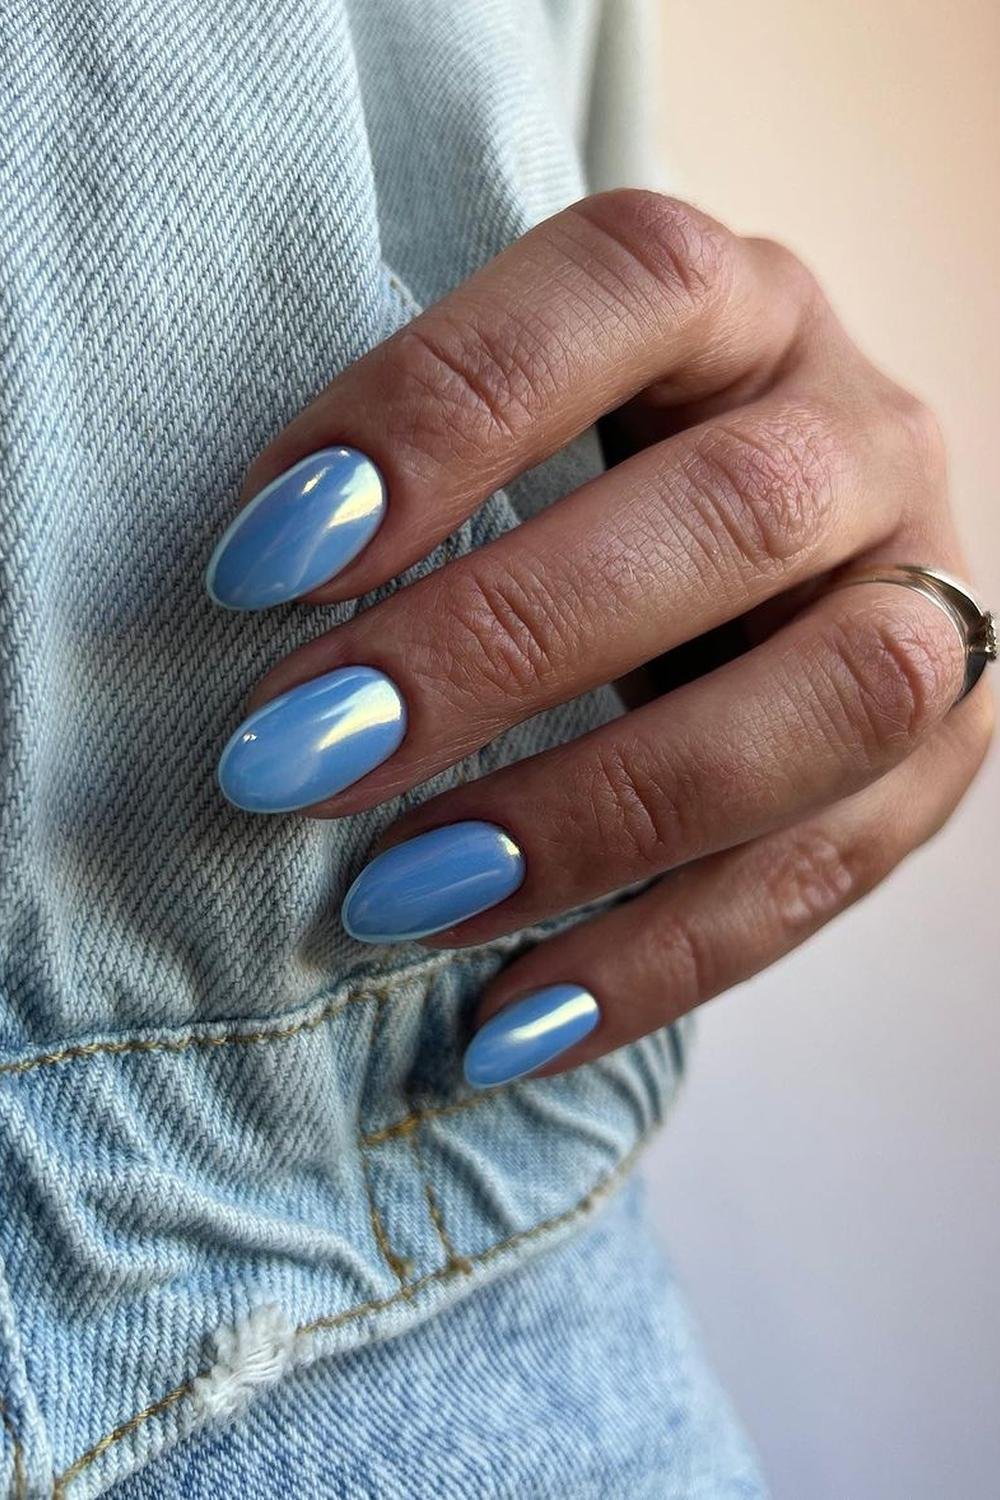 34 - Picture of Blue Chrome Nails